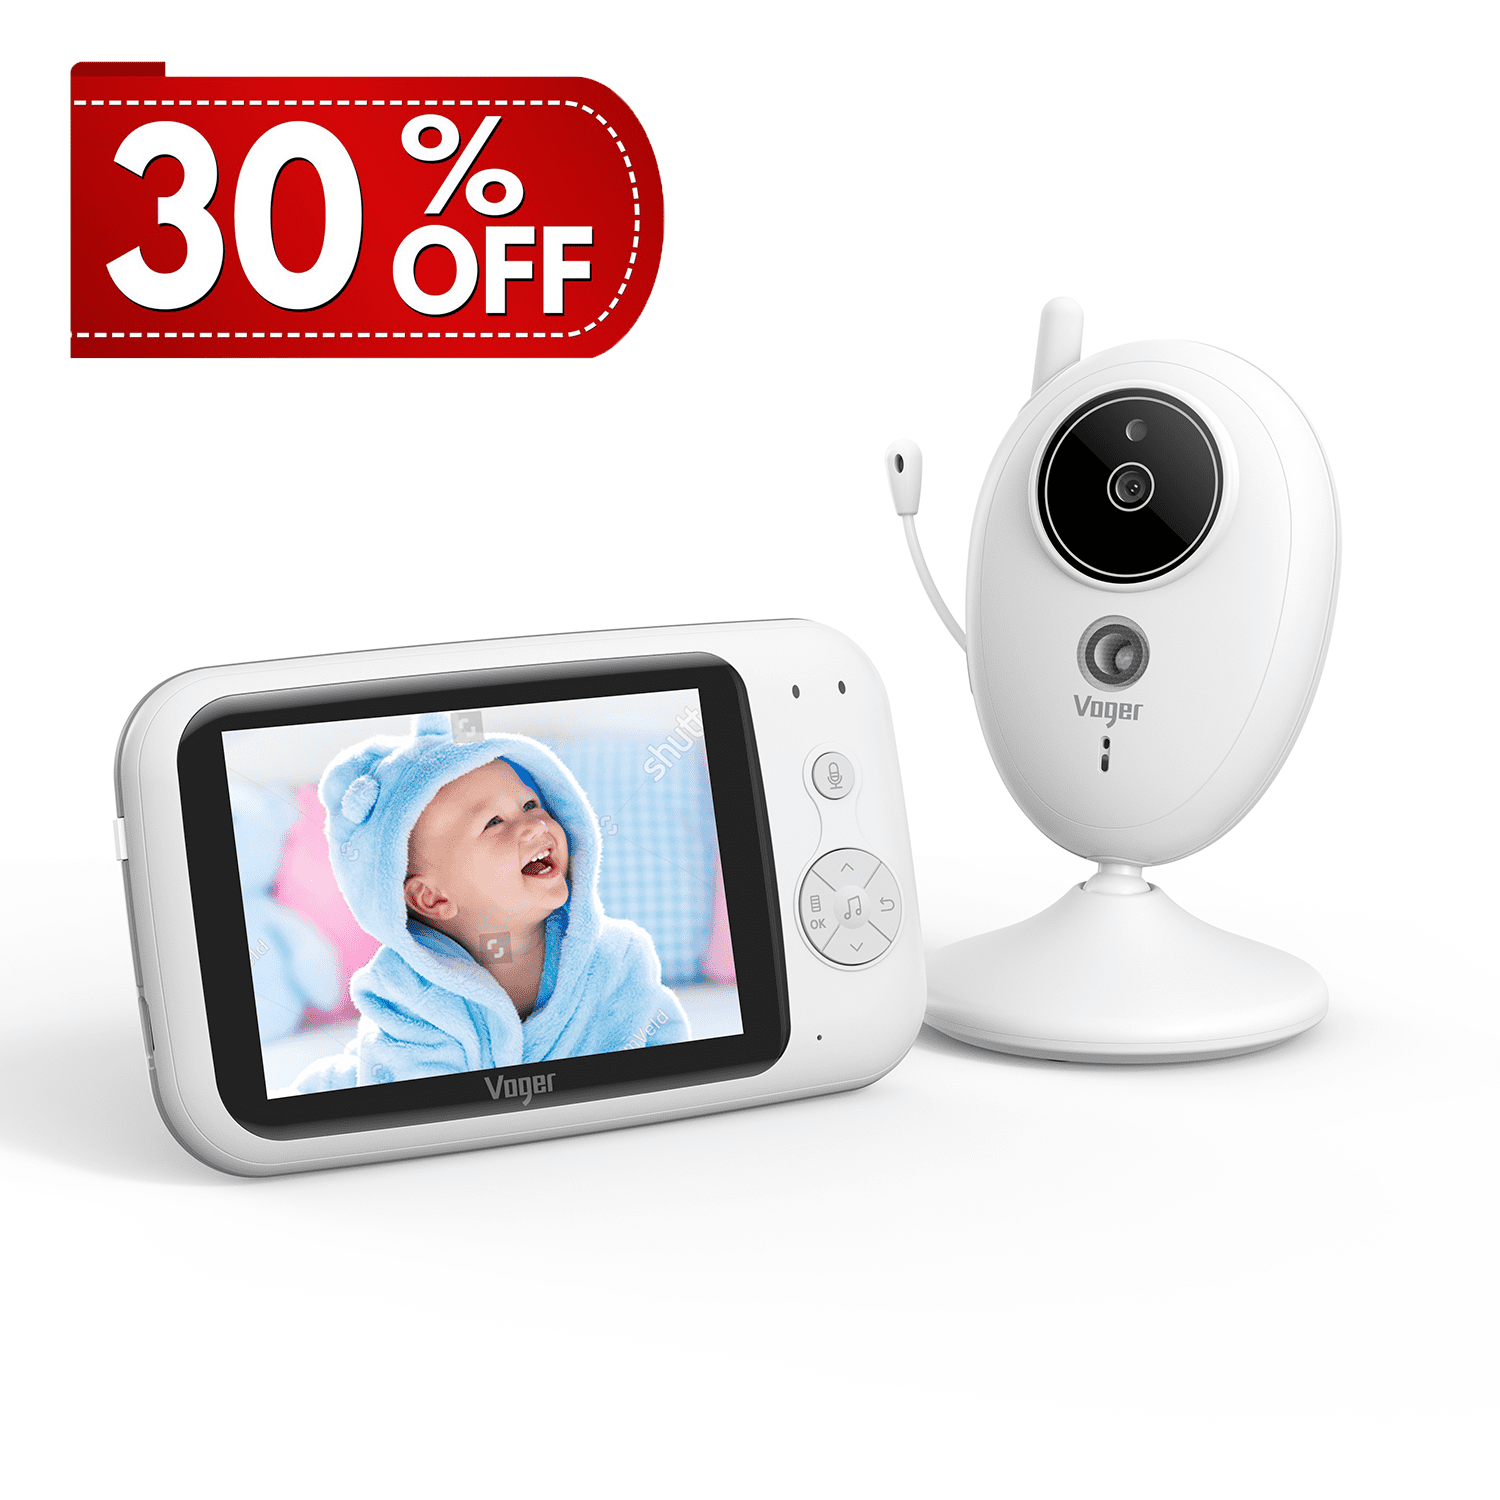 Wireless Digital Color LCD Baby Monitor Camera Night Vision Audio Video 2.4GHz 